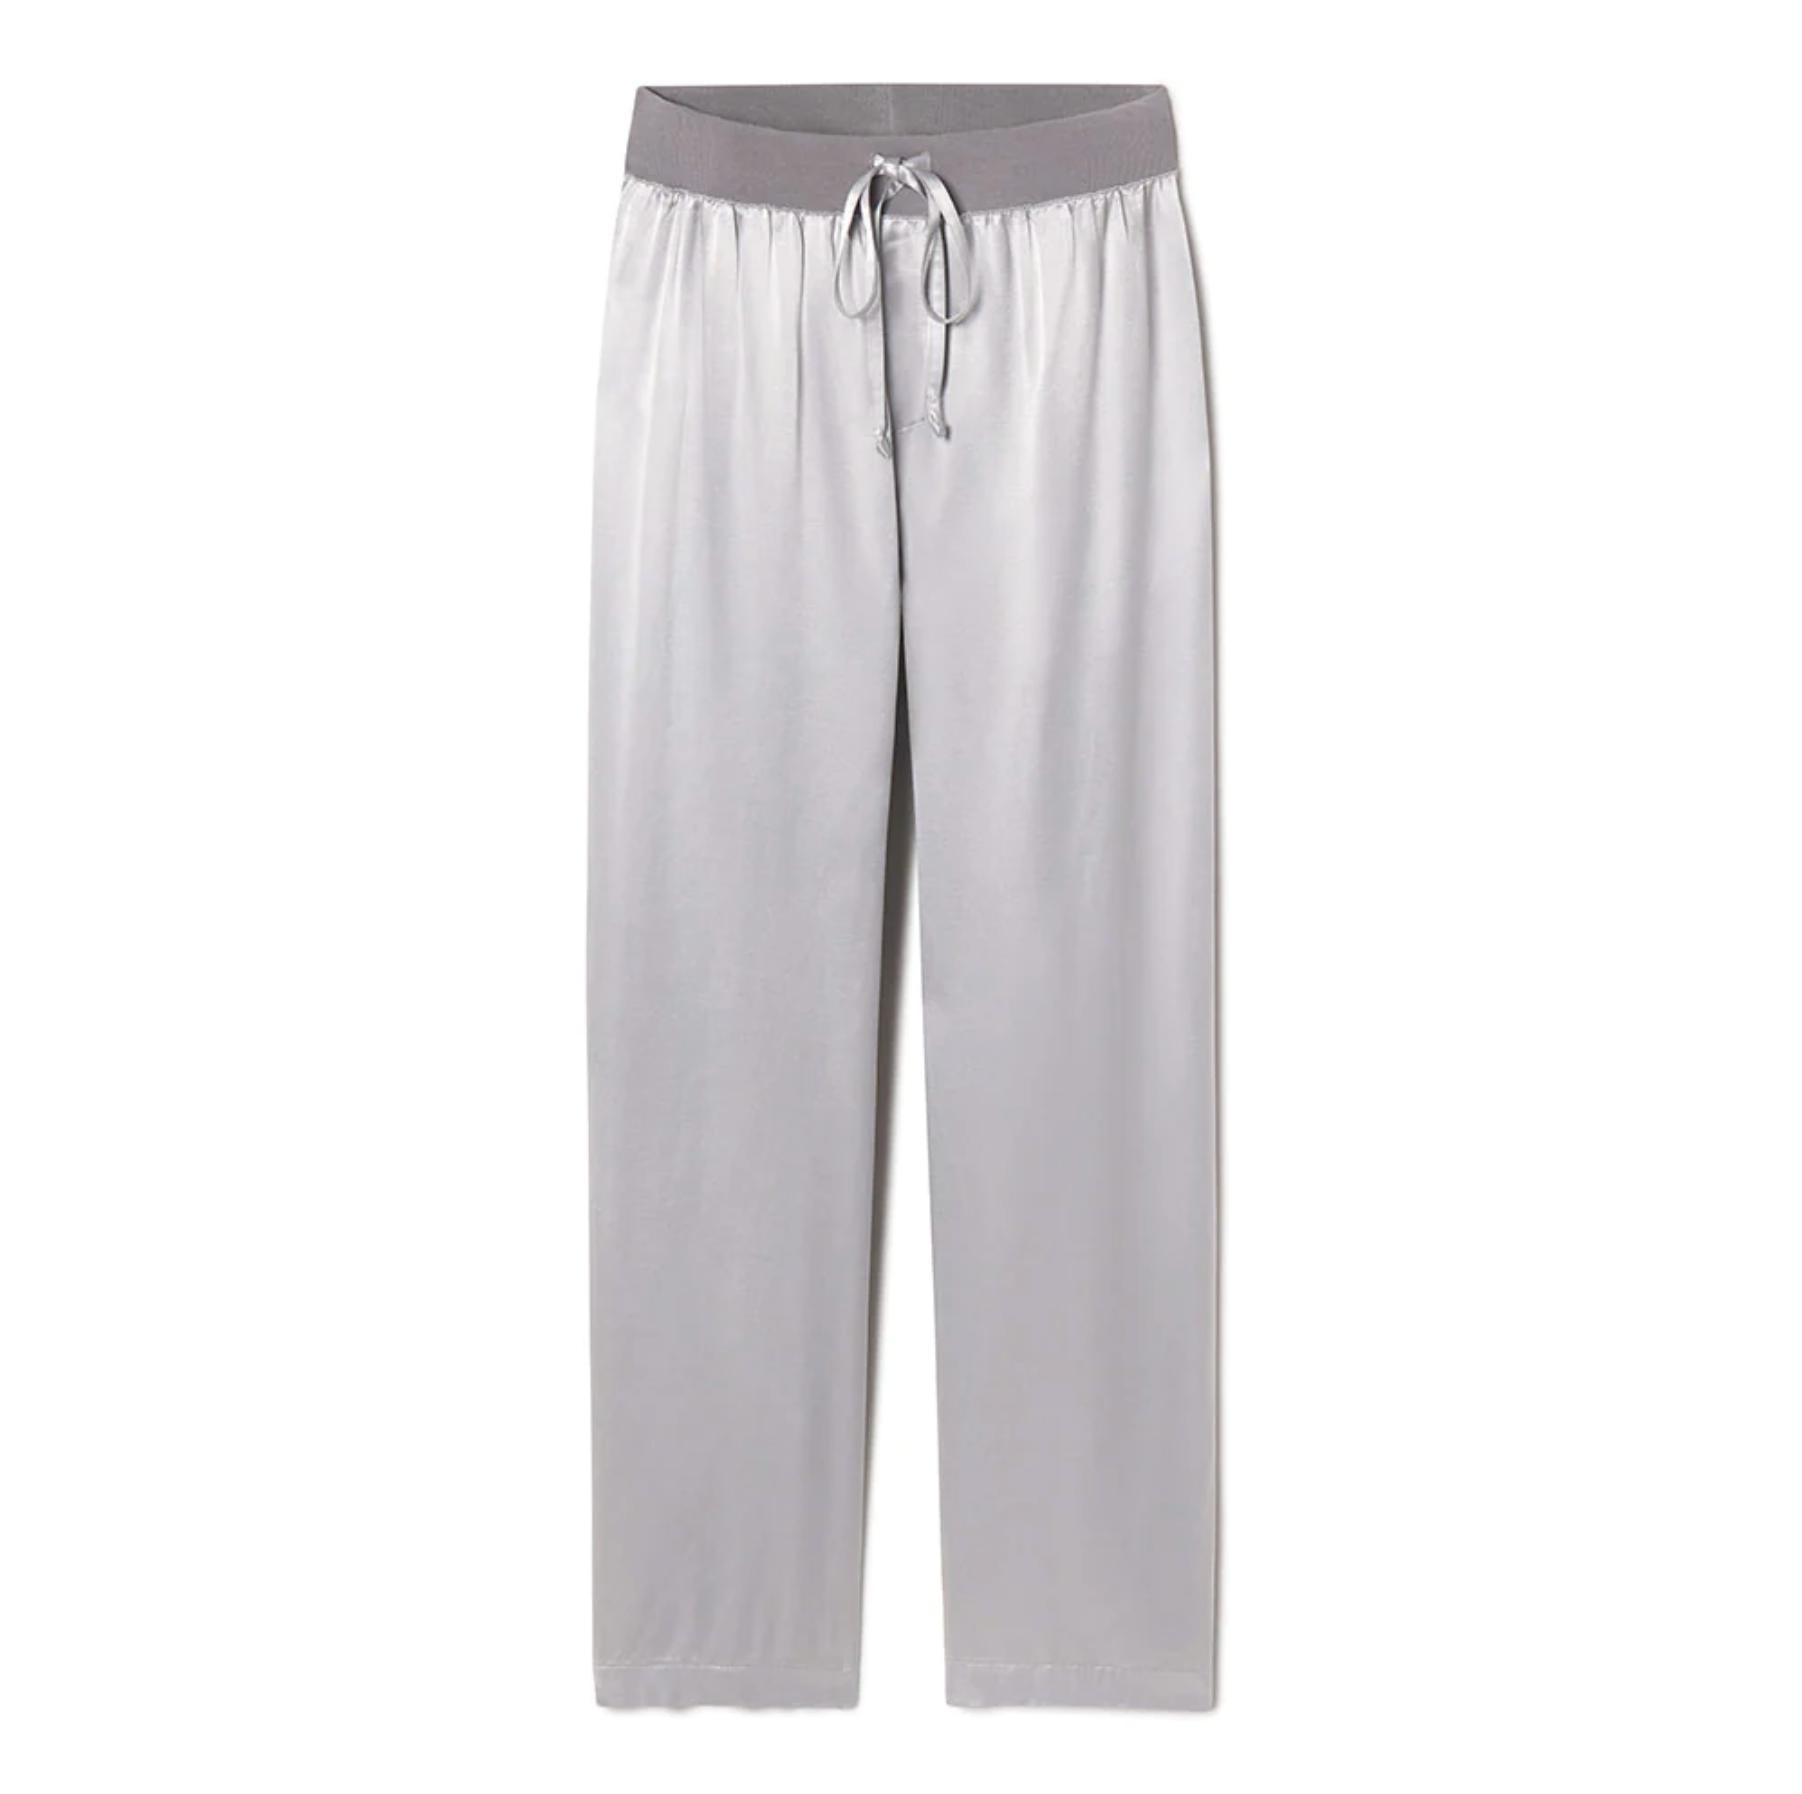 Jolie Satin Pant - The French Shoppe